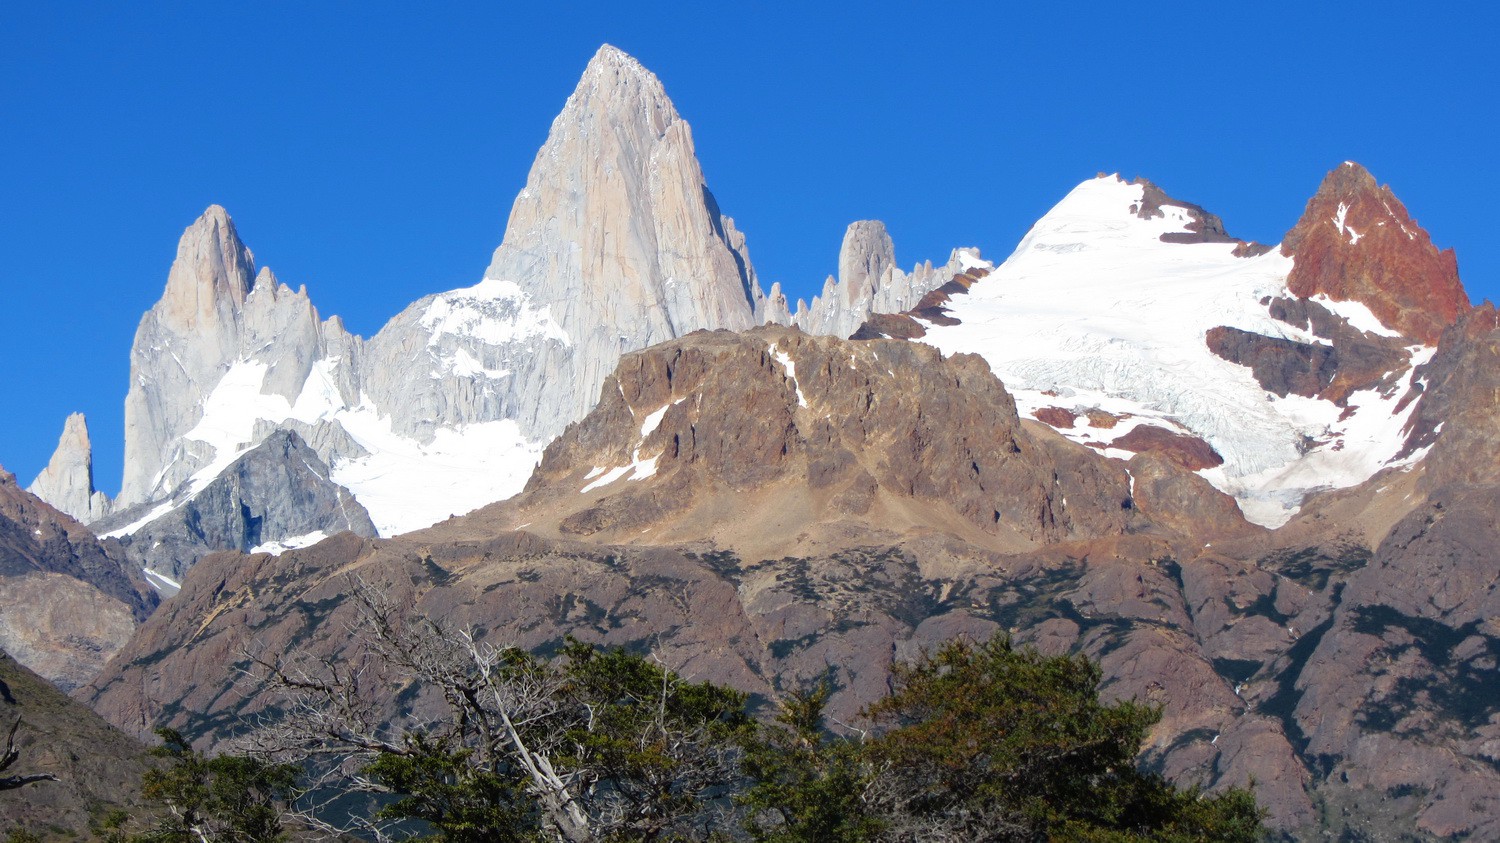 North face of Cerro Fitz Roy from the ascent to Loma del Diablo